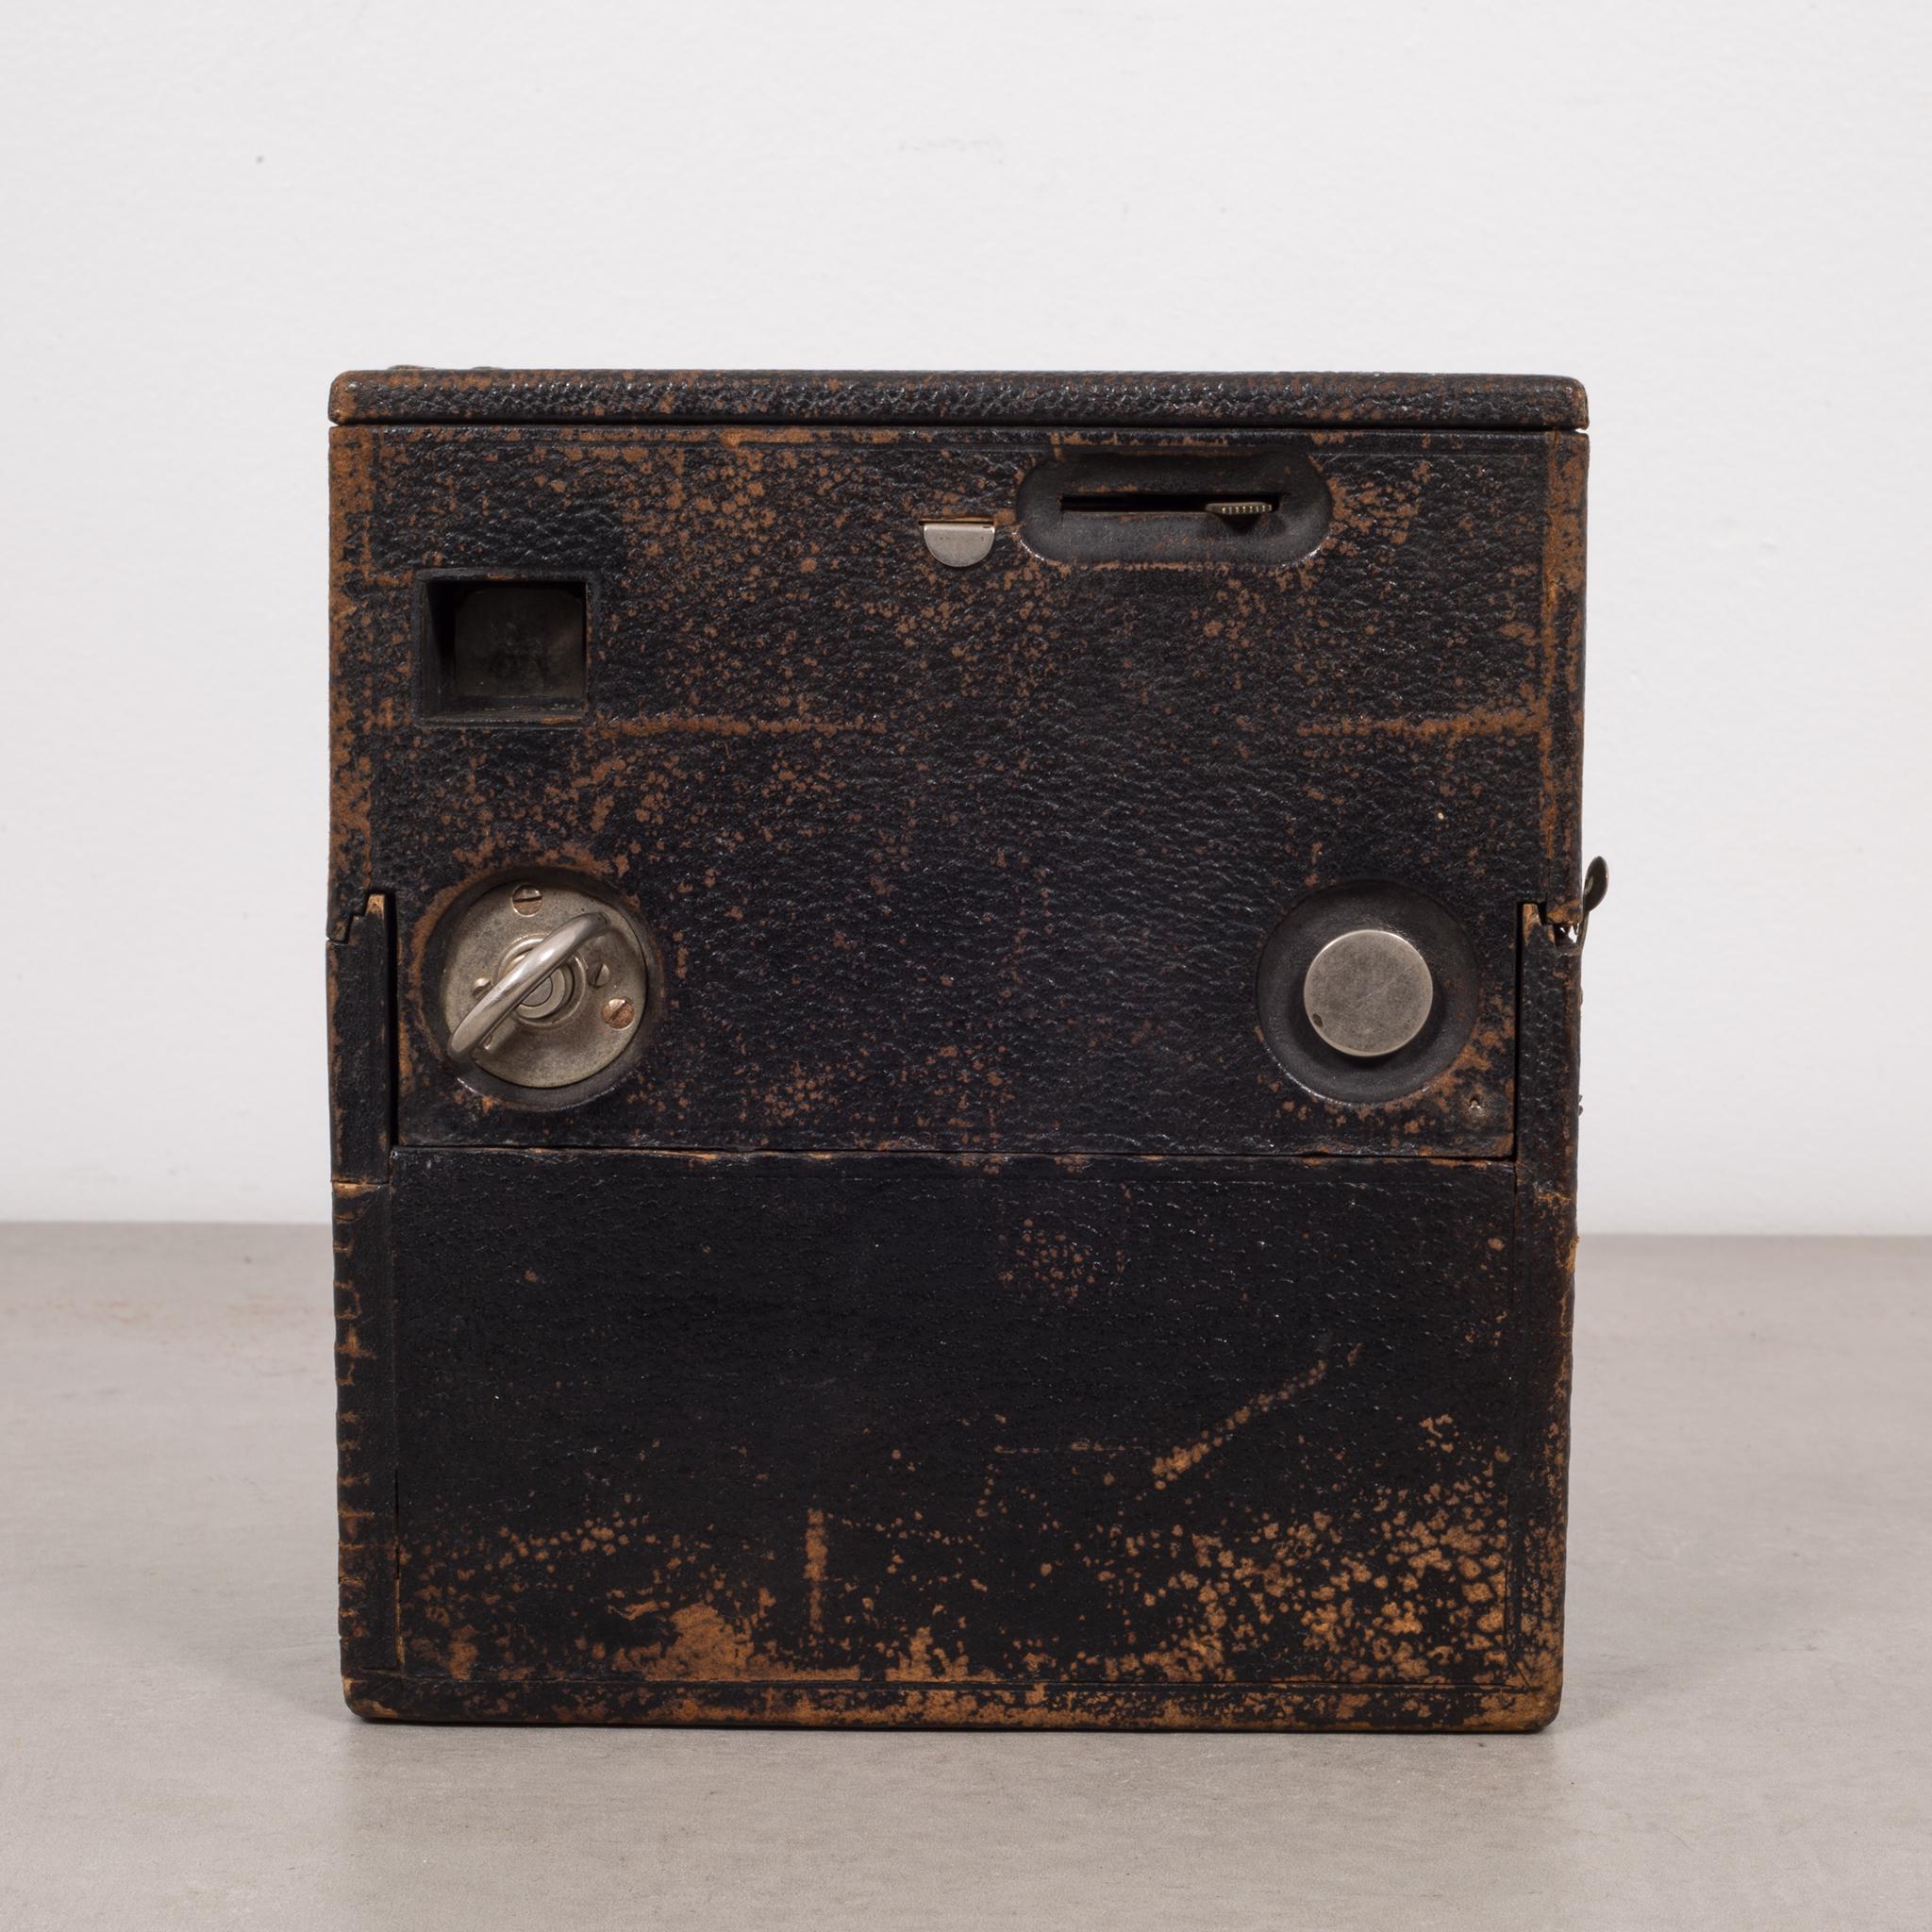 About

This is an original Eastman Kodak Blair Camera Co. No. 4 Hawk Eye leather box camera with original label. This piece has retained its original finish with minimal structural damage. Camera may or may not work.

Creator Eastman Kodak/Blair